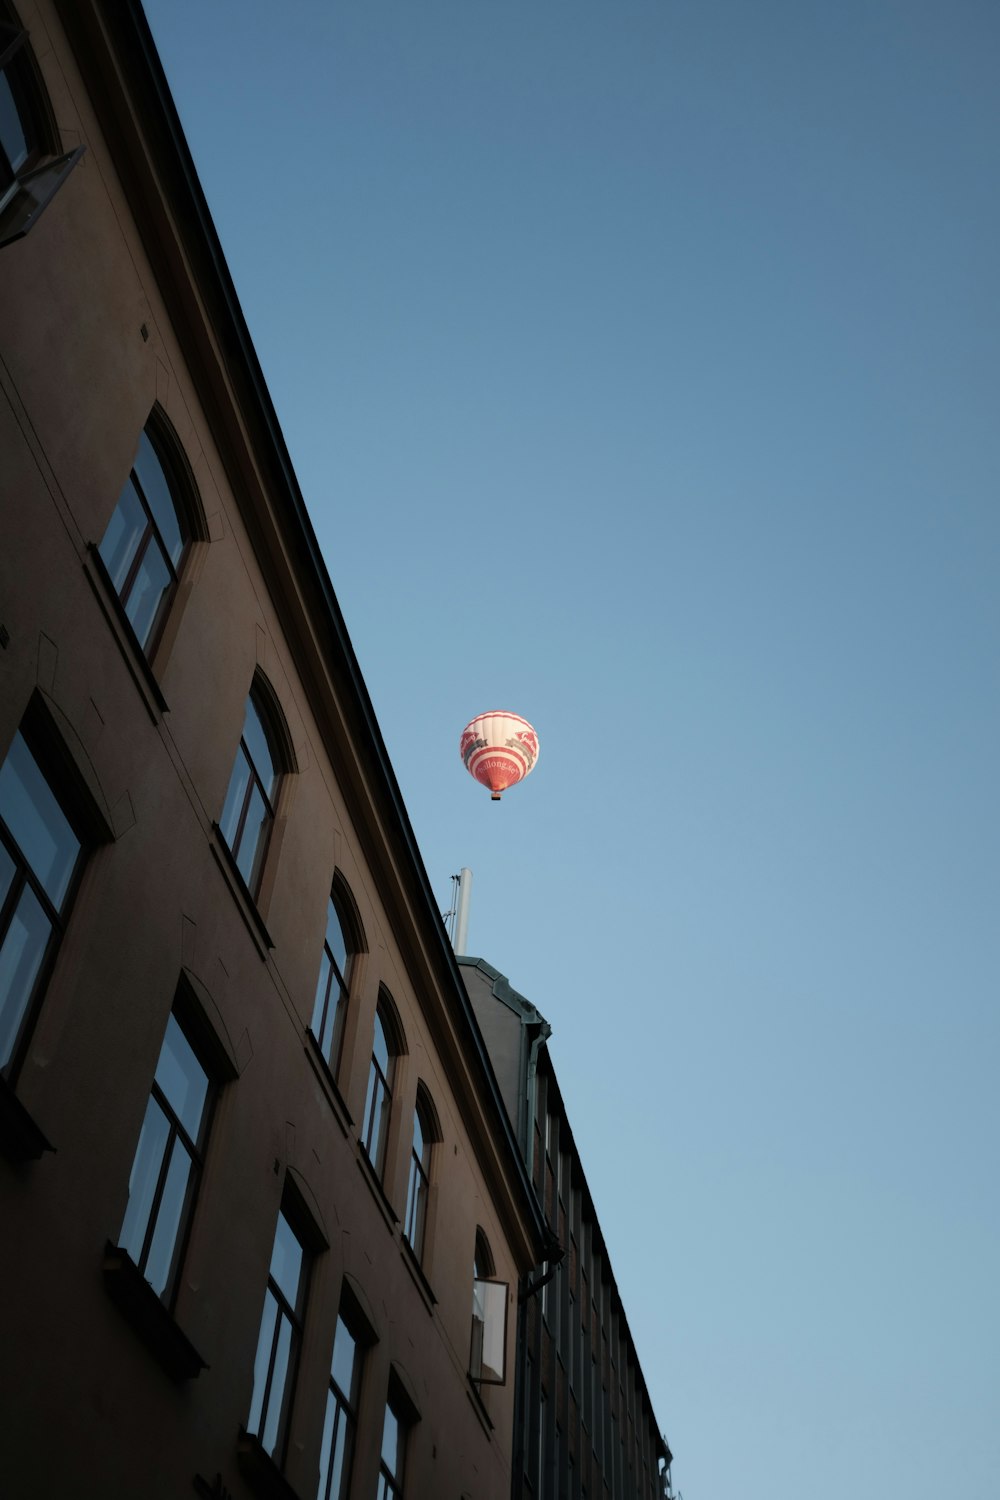 pink and white hot air balloon on mid air during daytime